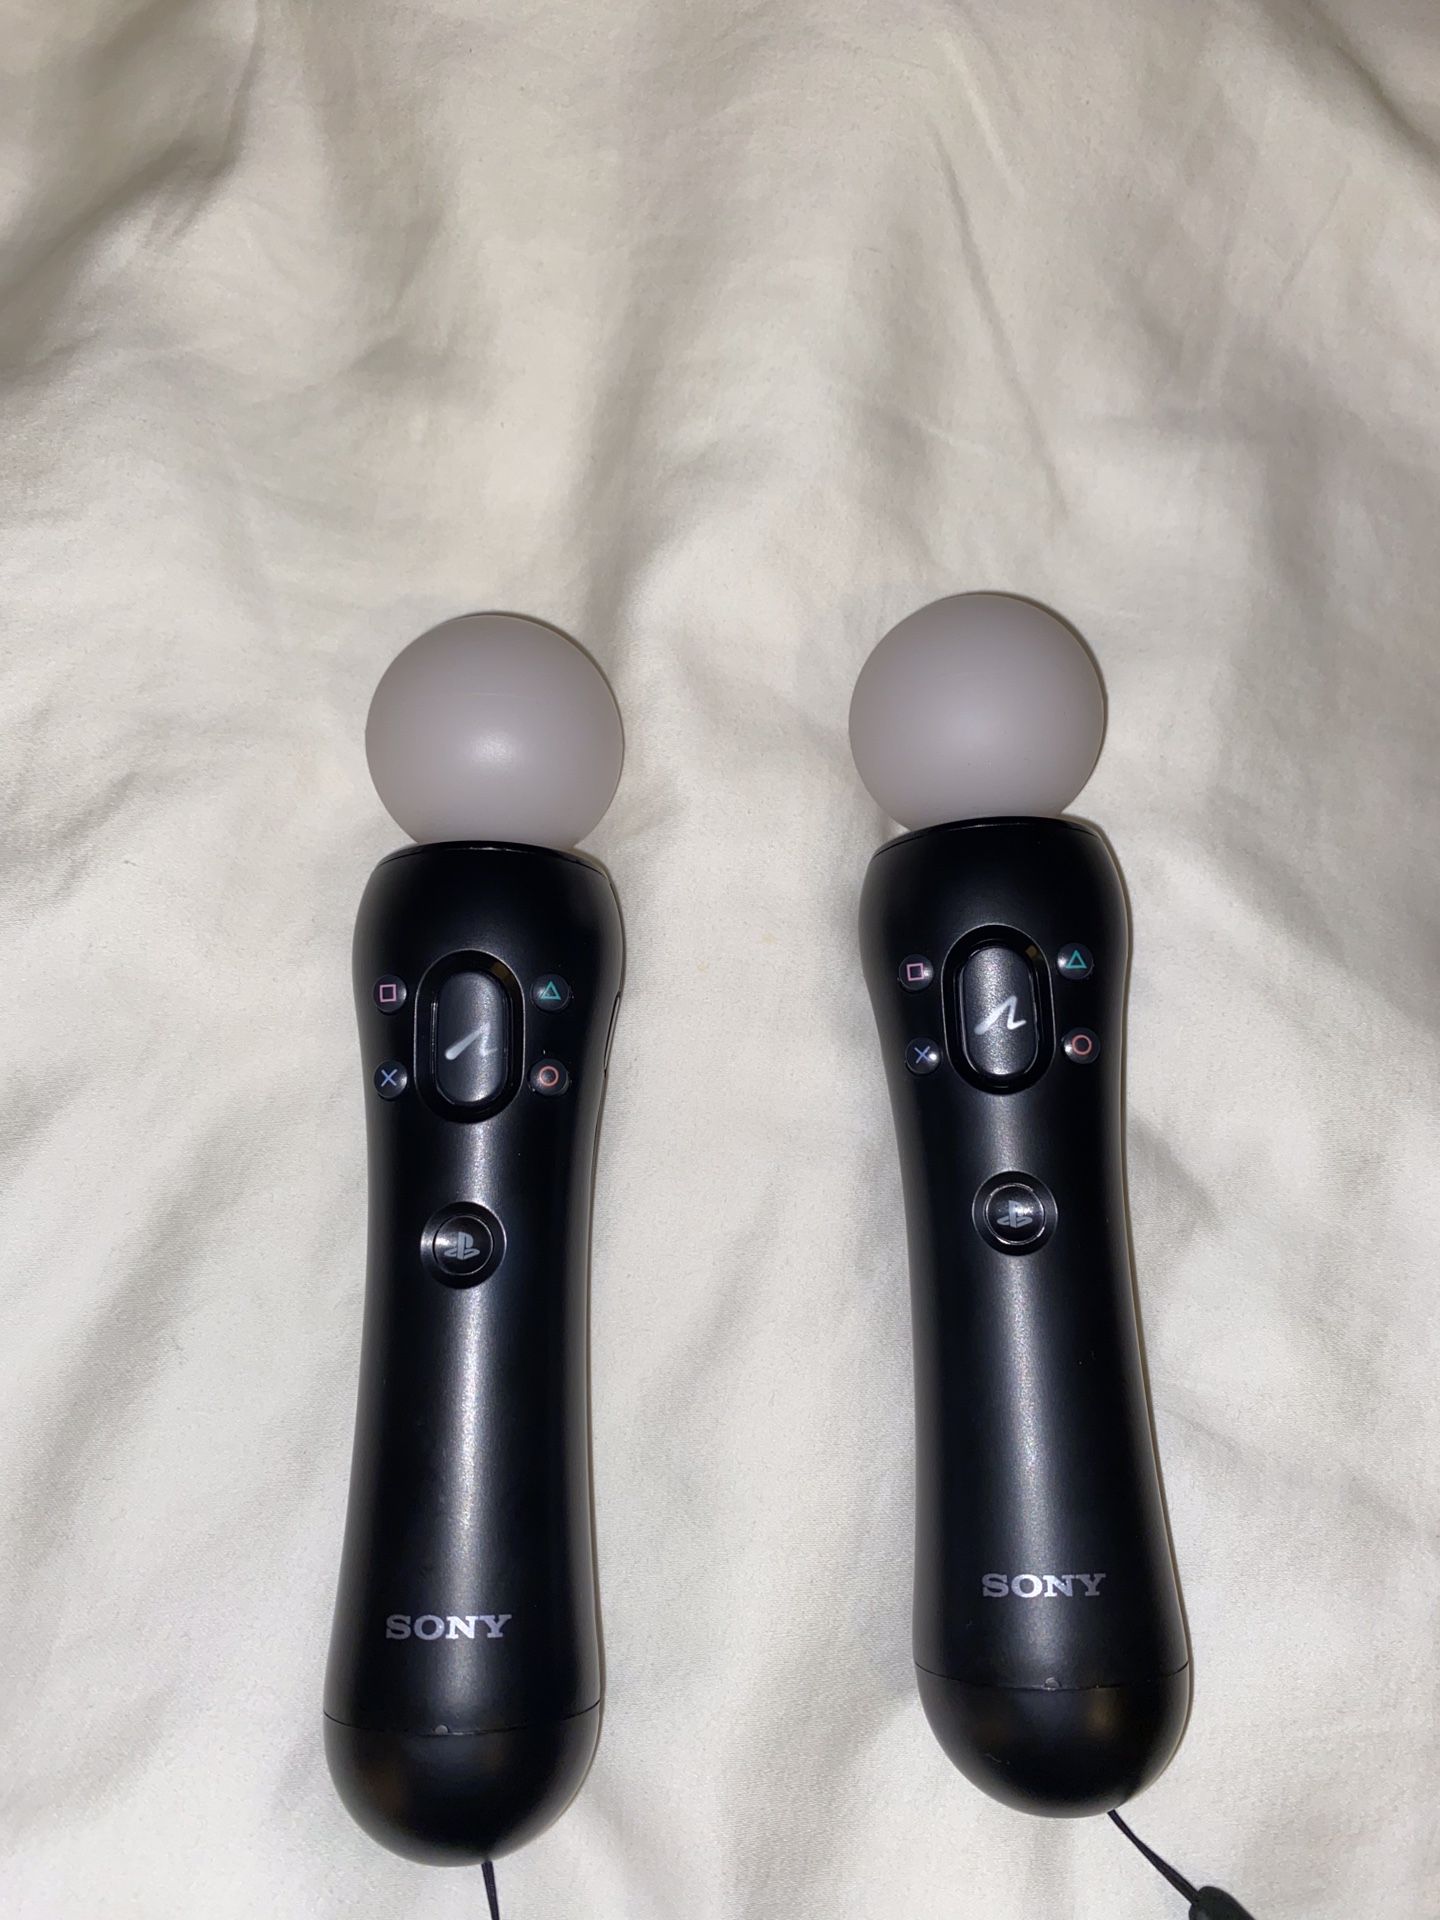 Two PlayStation move motion controllers for PS4 VR virtual reality